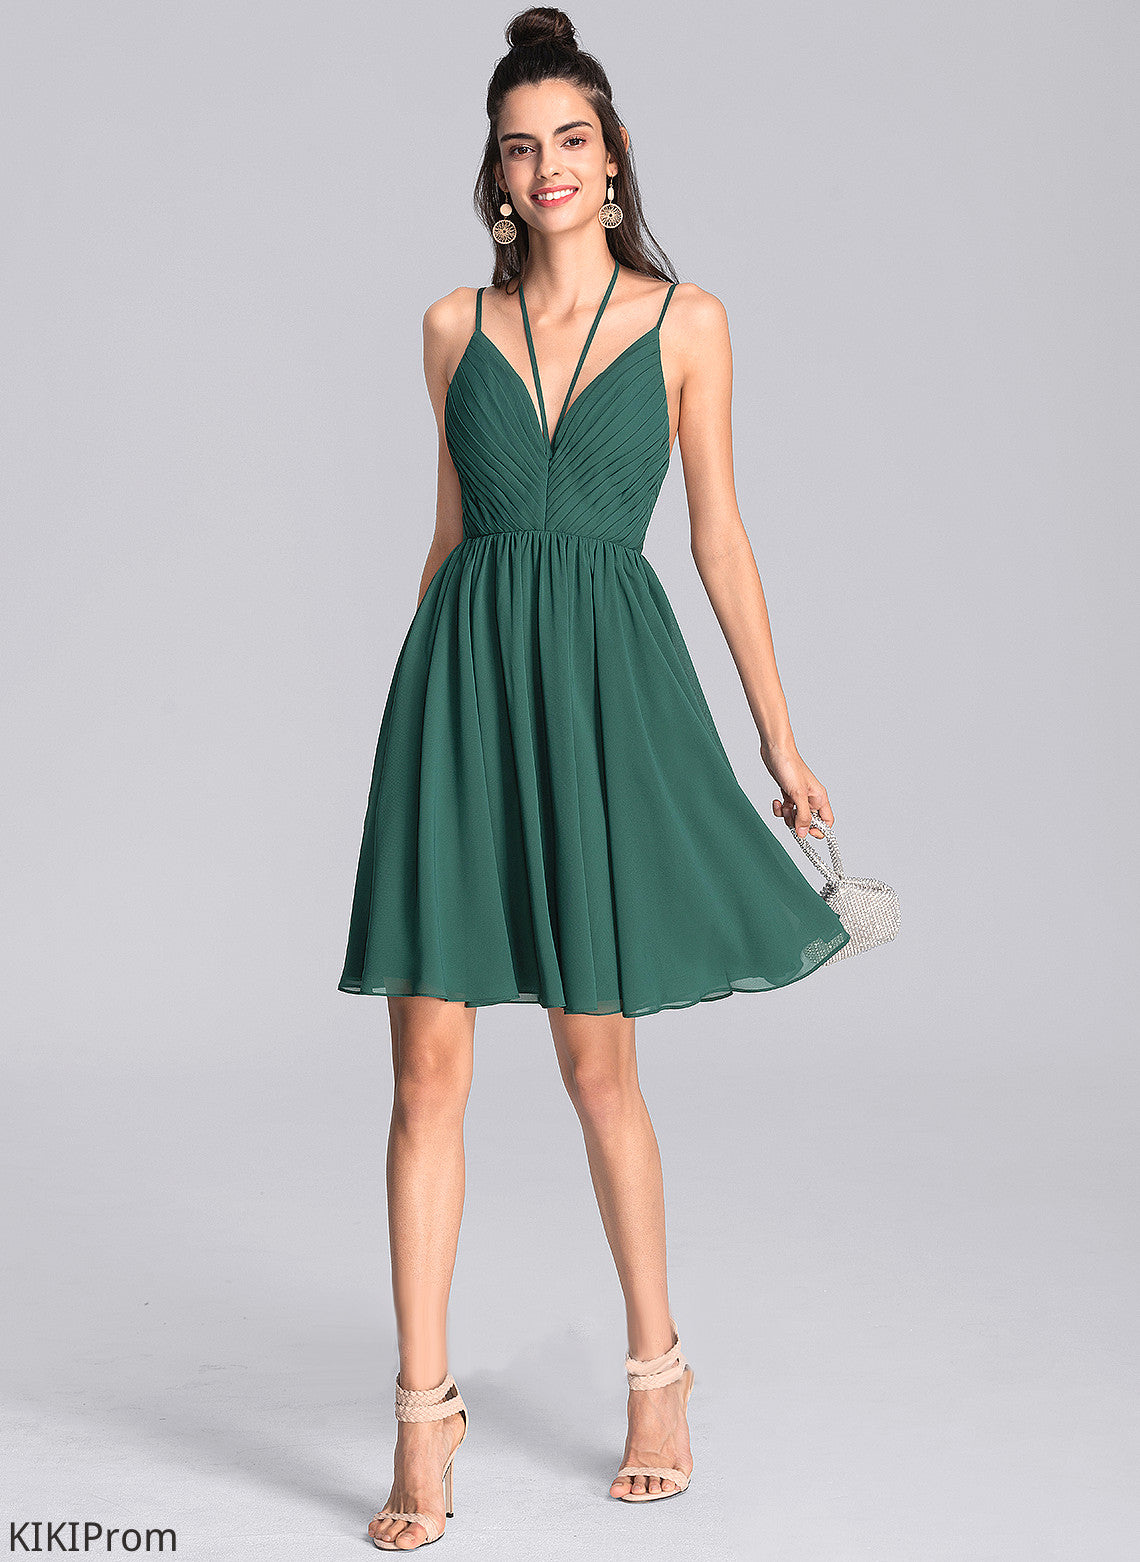 Ruffle Knee-Length V-neck Homecoming Dress Homecoming Dresses Chiffon A-Line With Cailyn